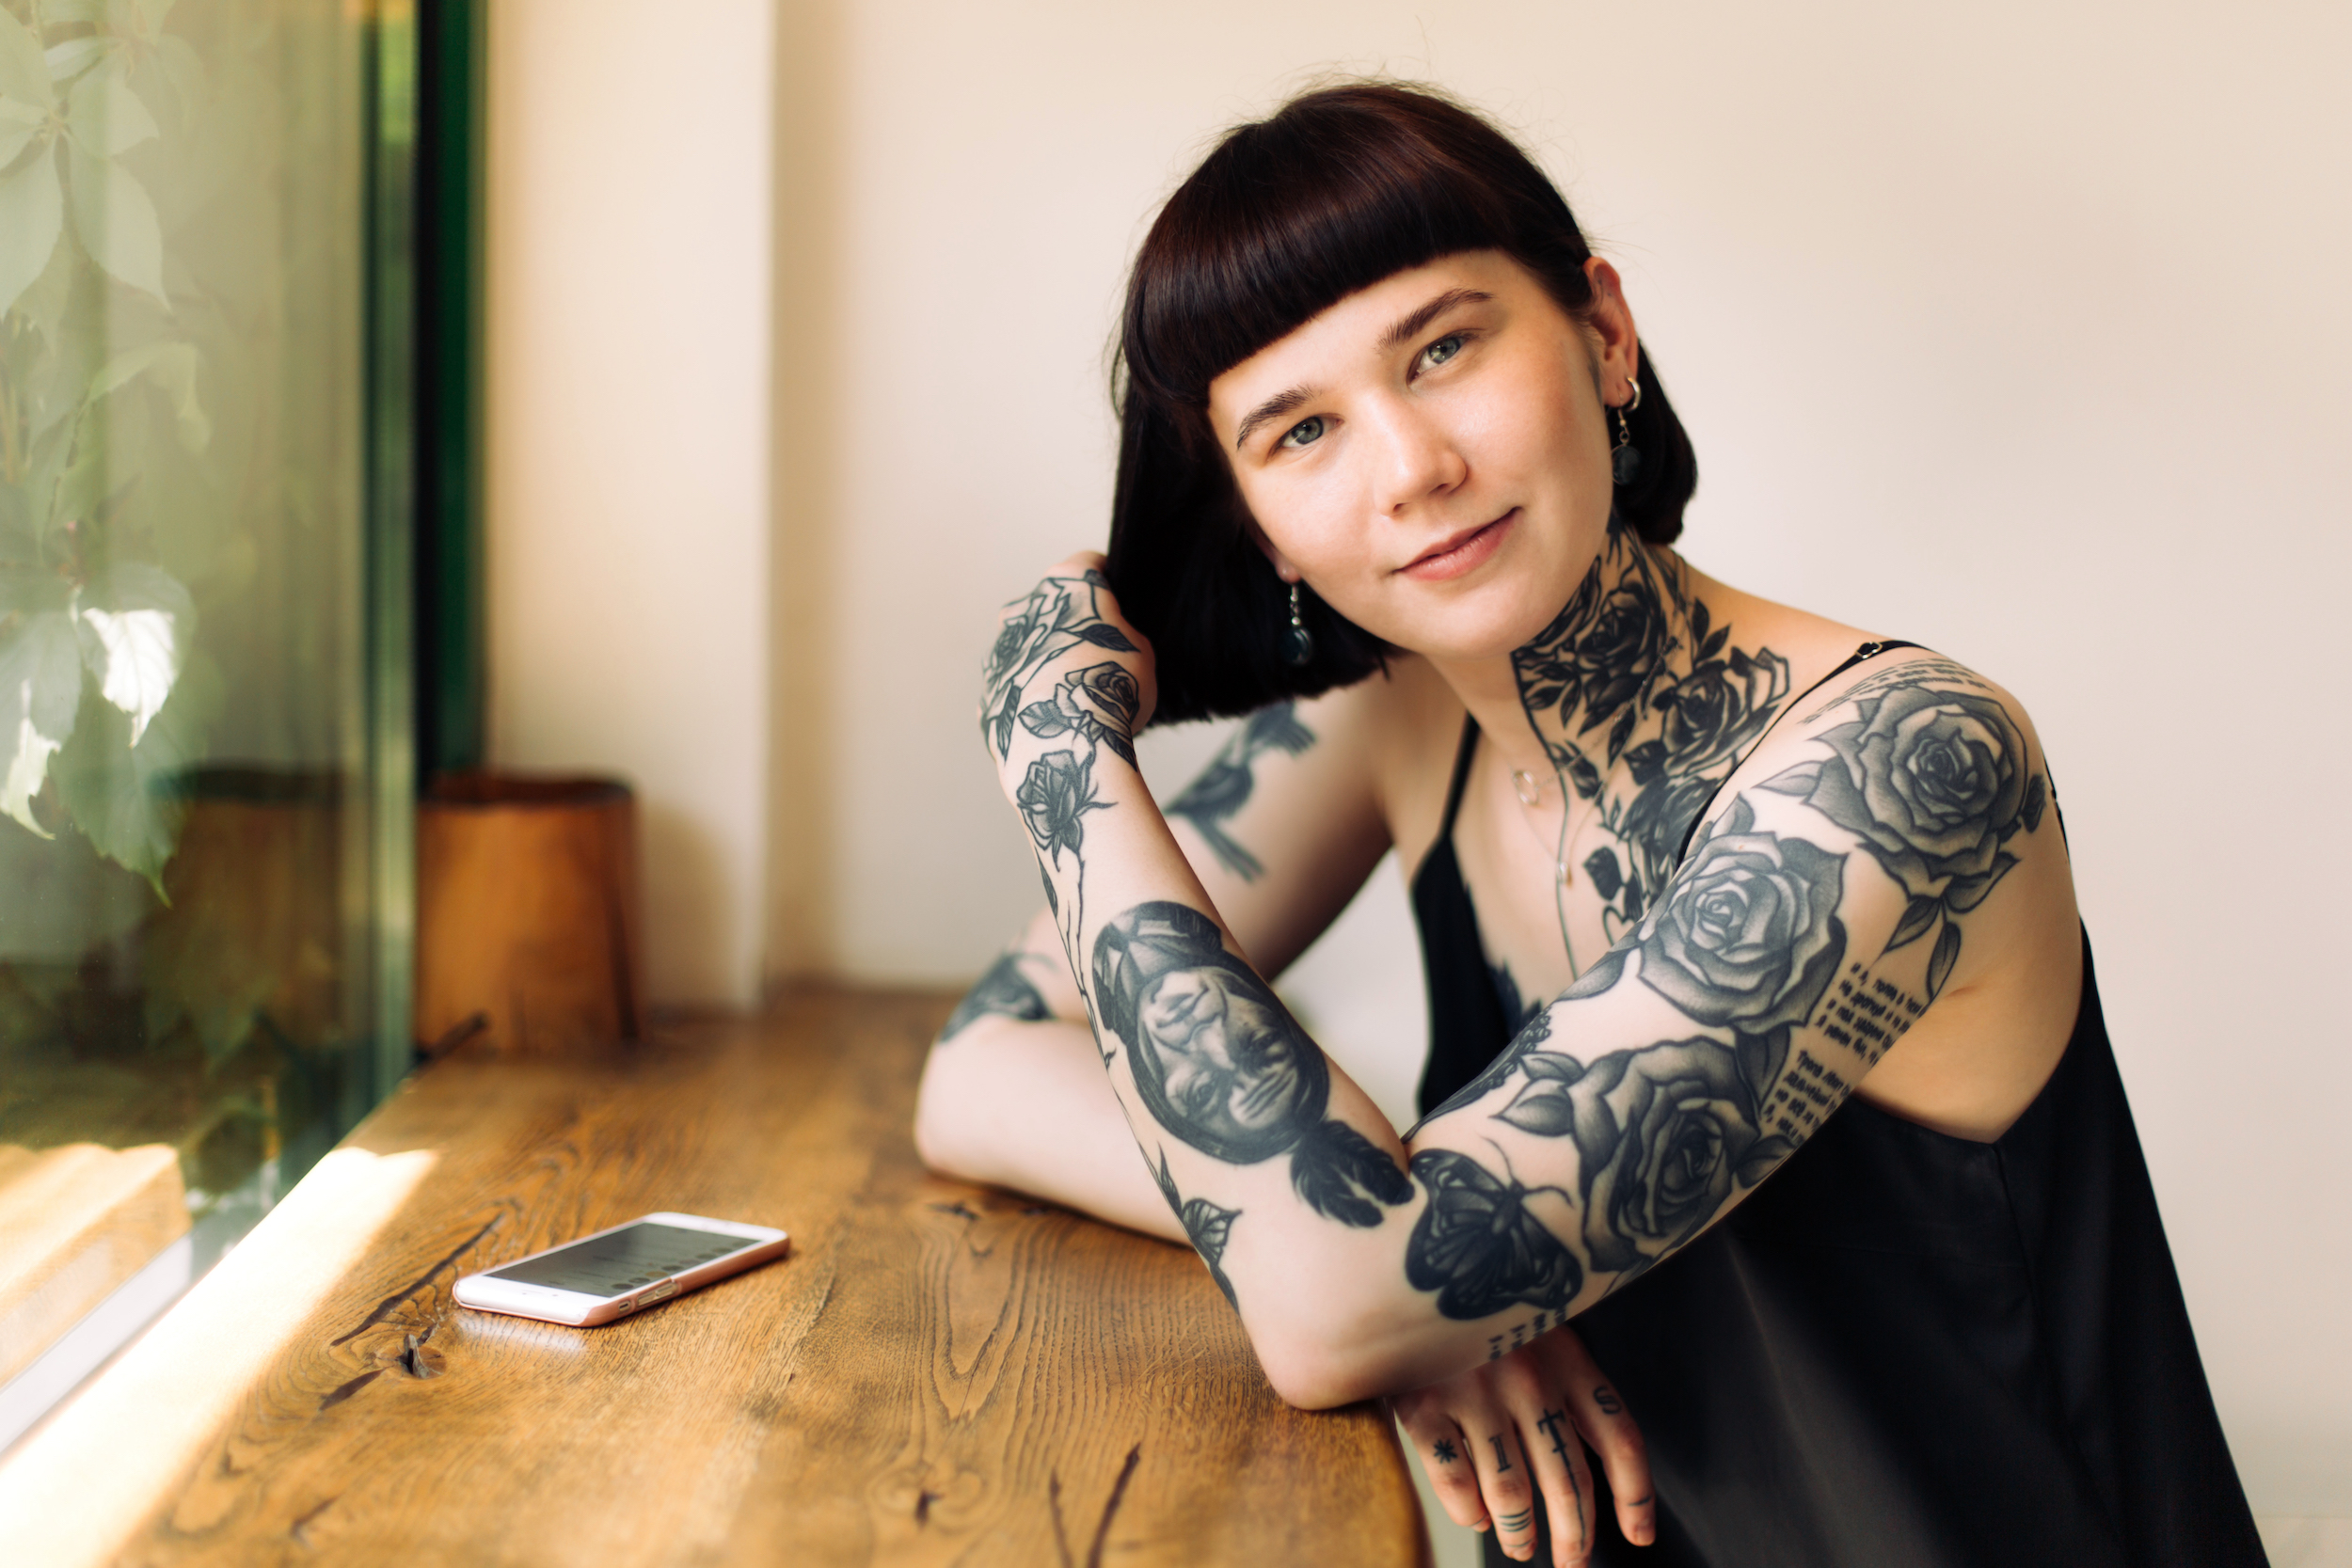 A woman with tattoos smiling